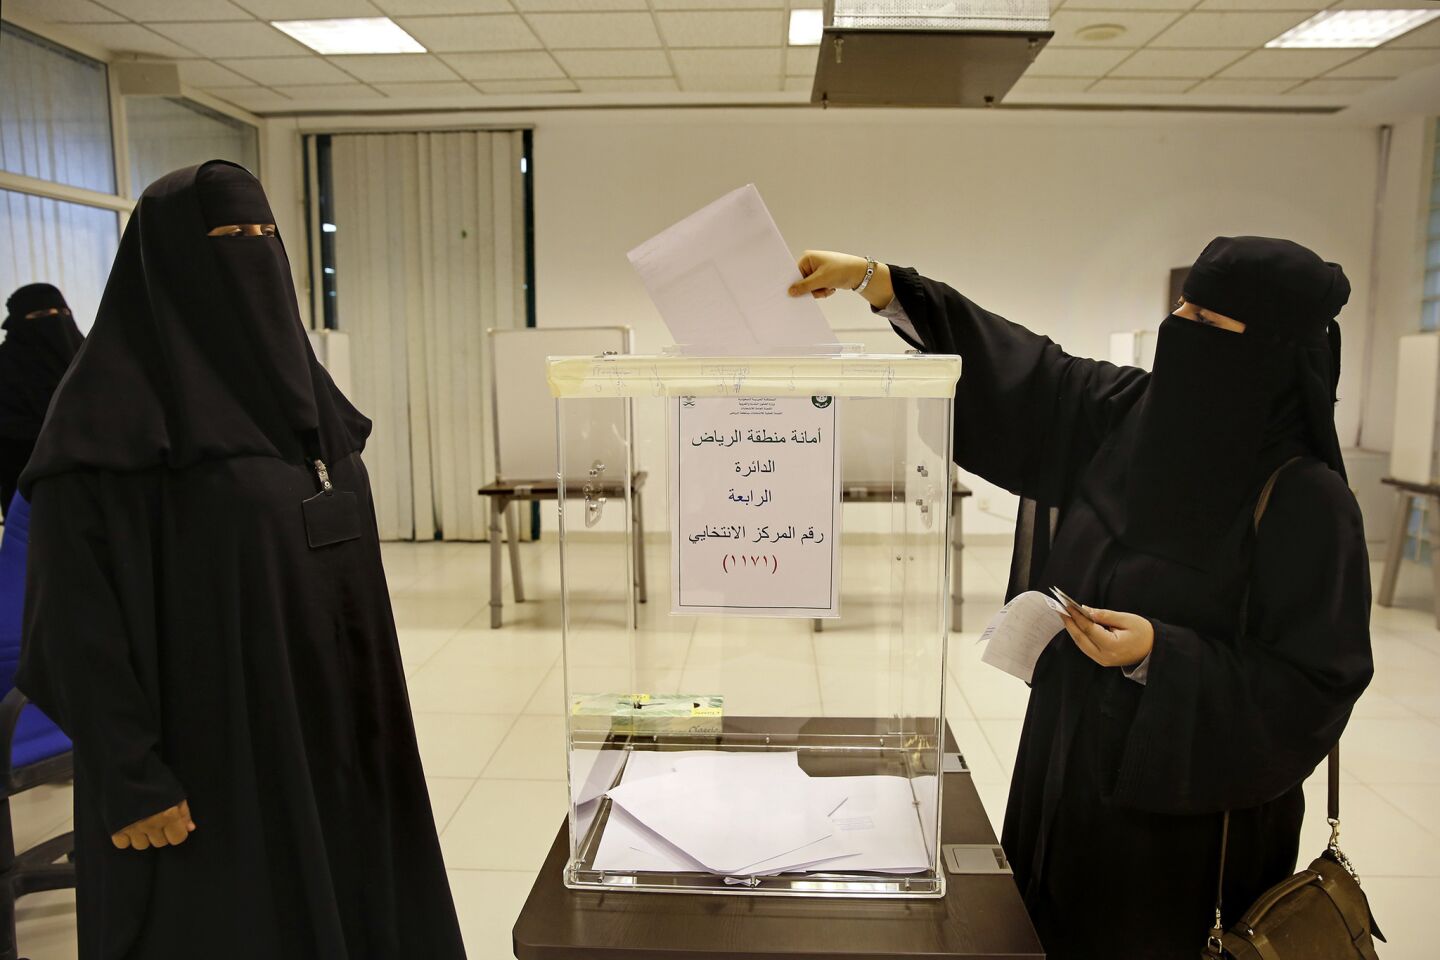 Volunteer Fatima Al-Druby, left, stands by as a 4th District voter casts her ballot.